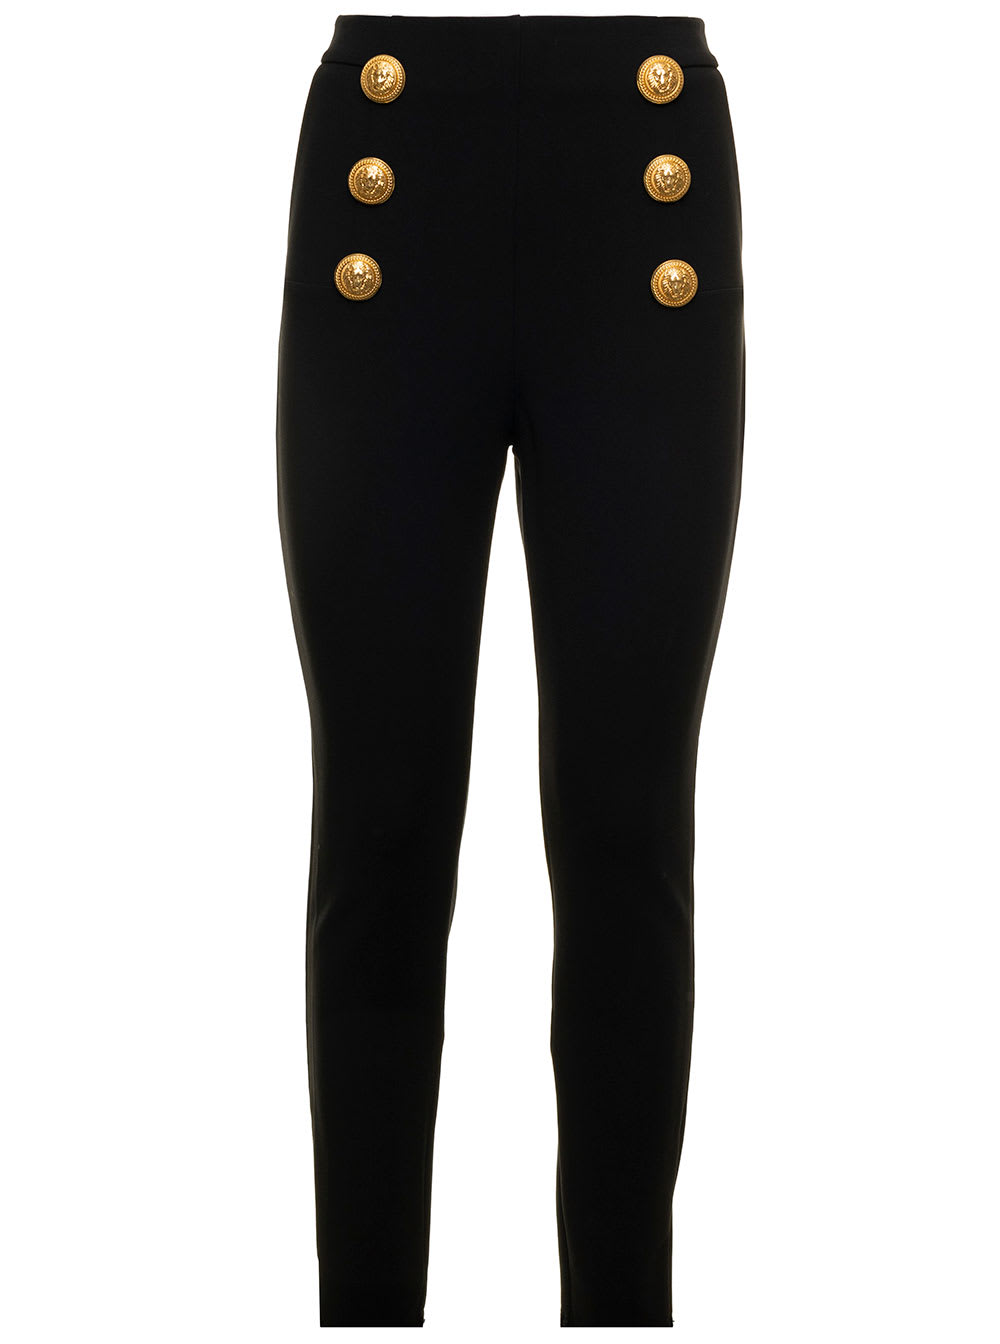 Balmain Black Skinny Trousers In Stretch Knit With Embossed Gold-tone Dome Buttons In Gold-tone Balmain Woman